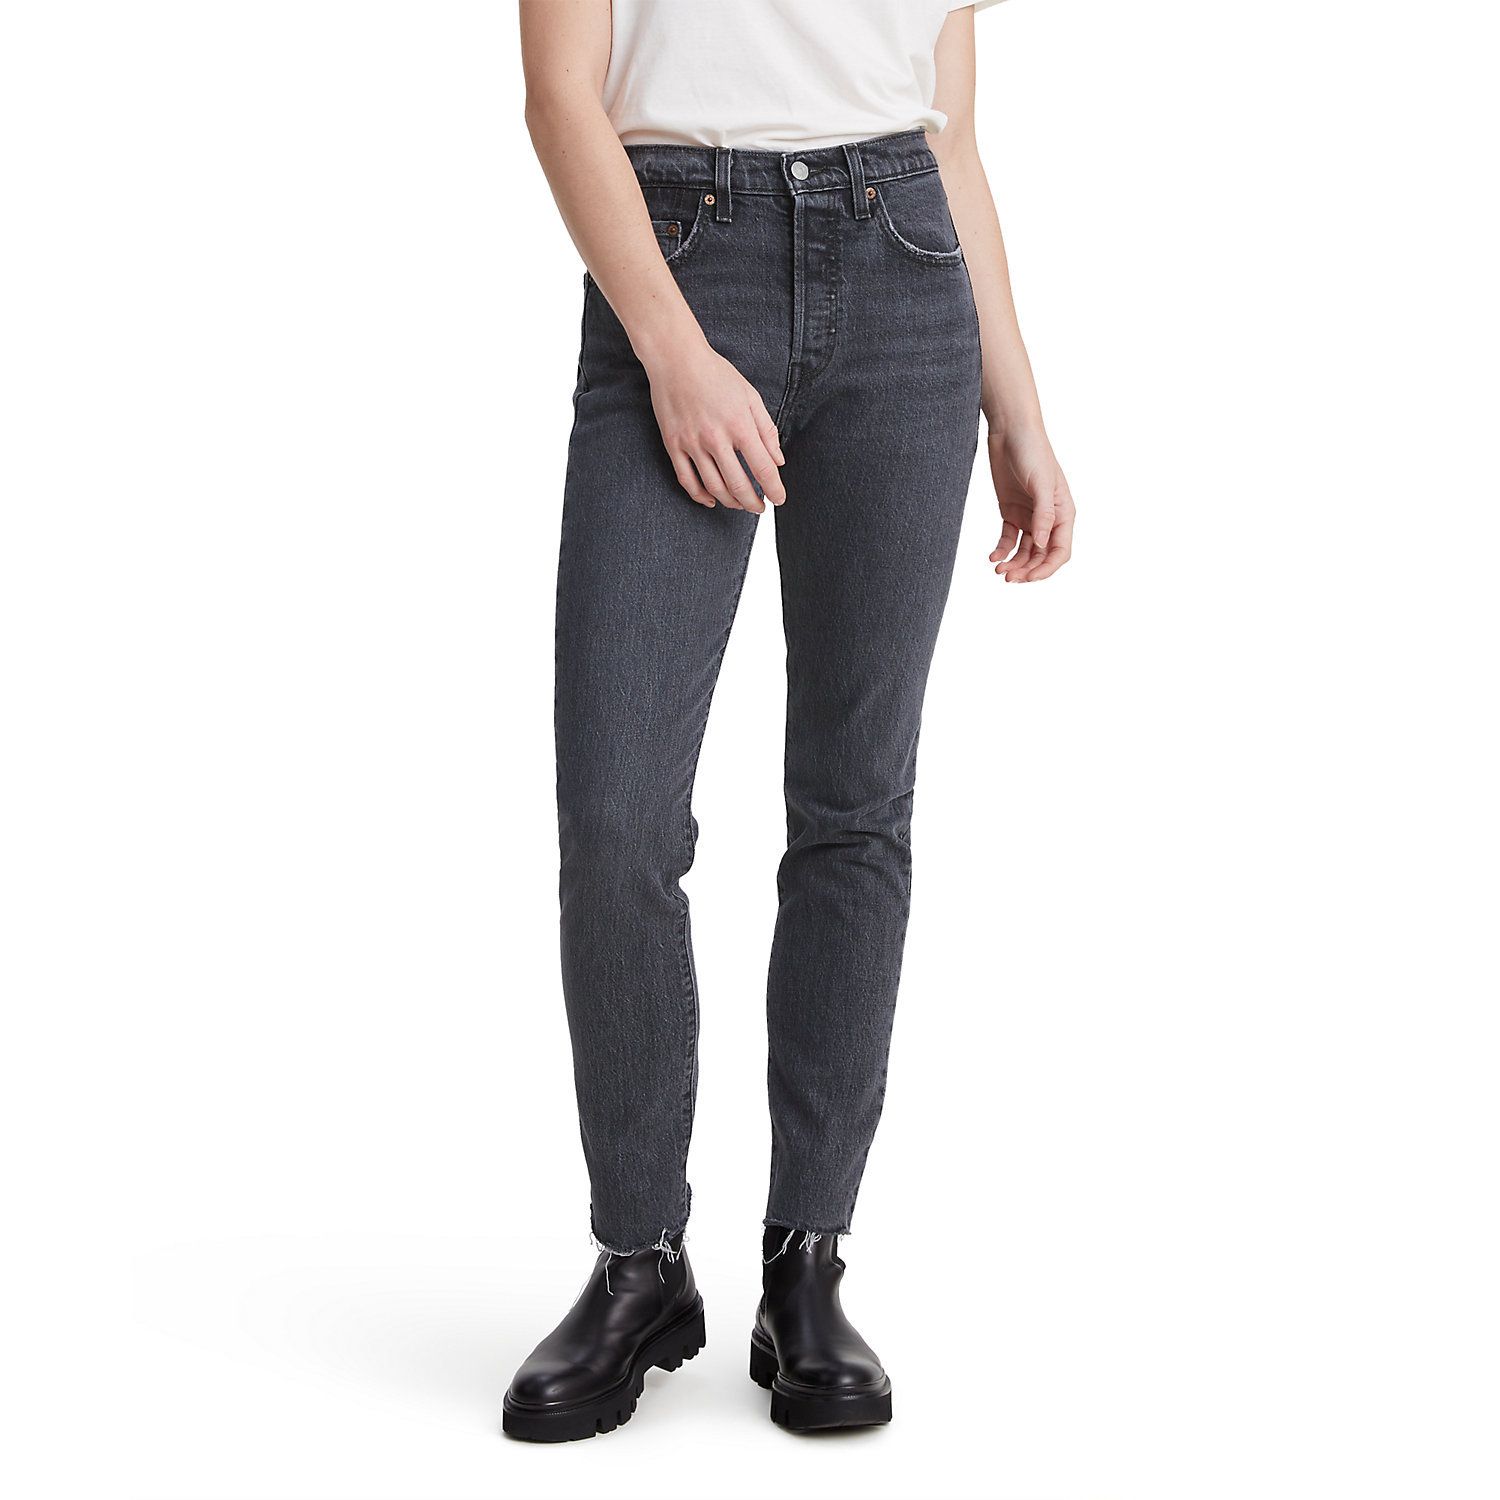 Image for Levi's Women's 501 High Rise Skinny Jeans at Kohl's.